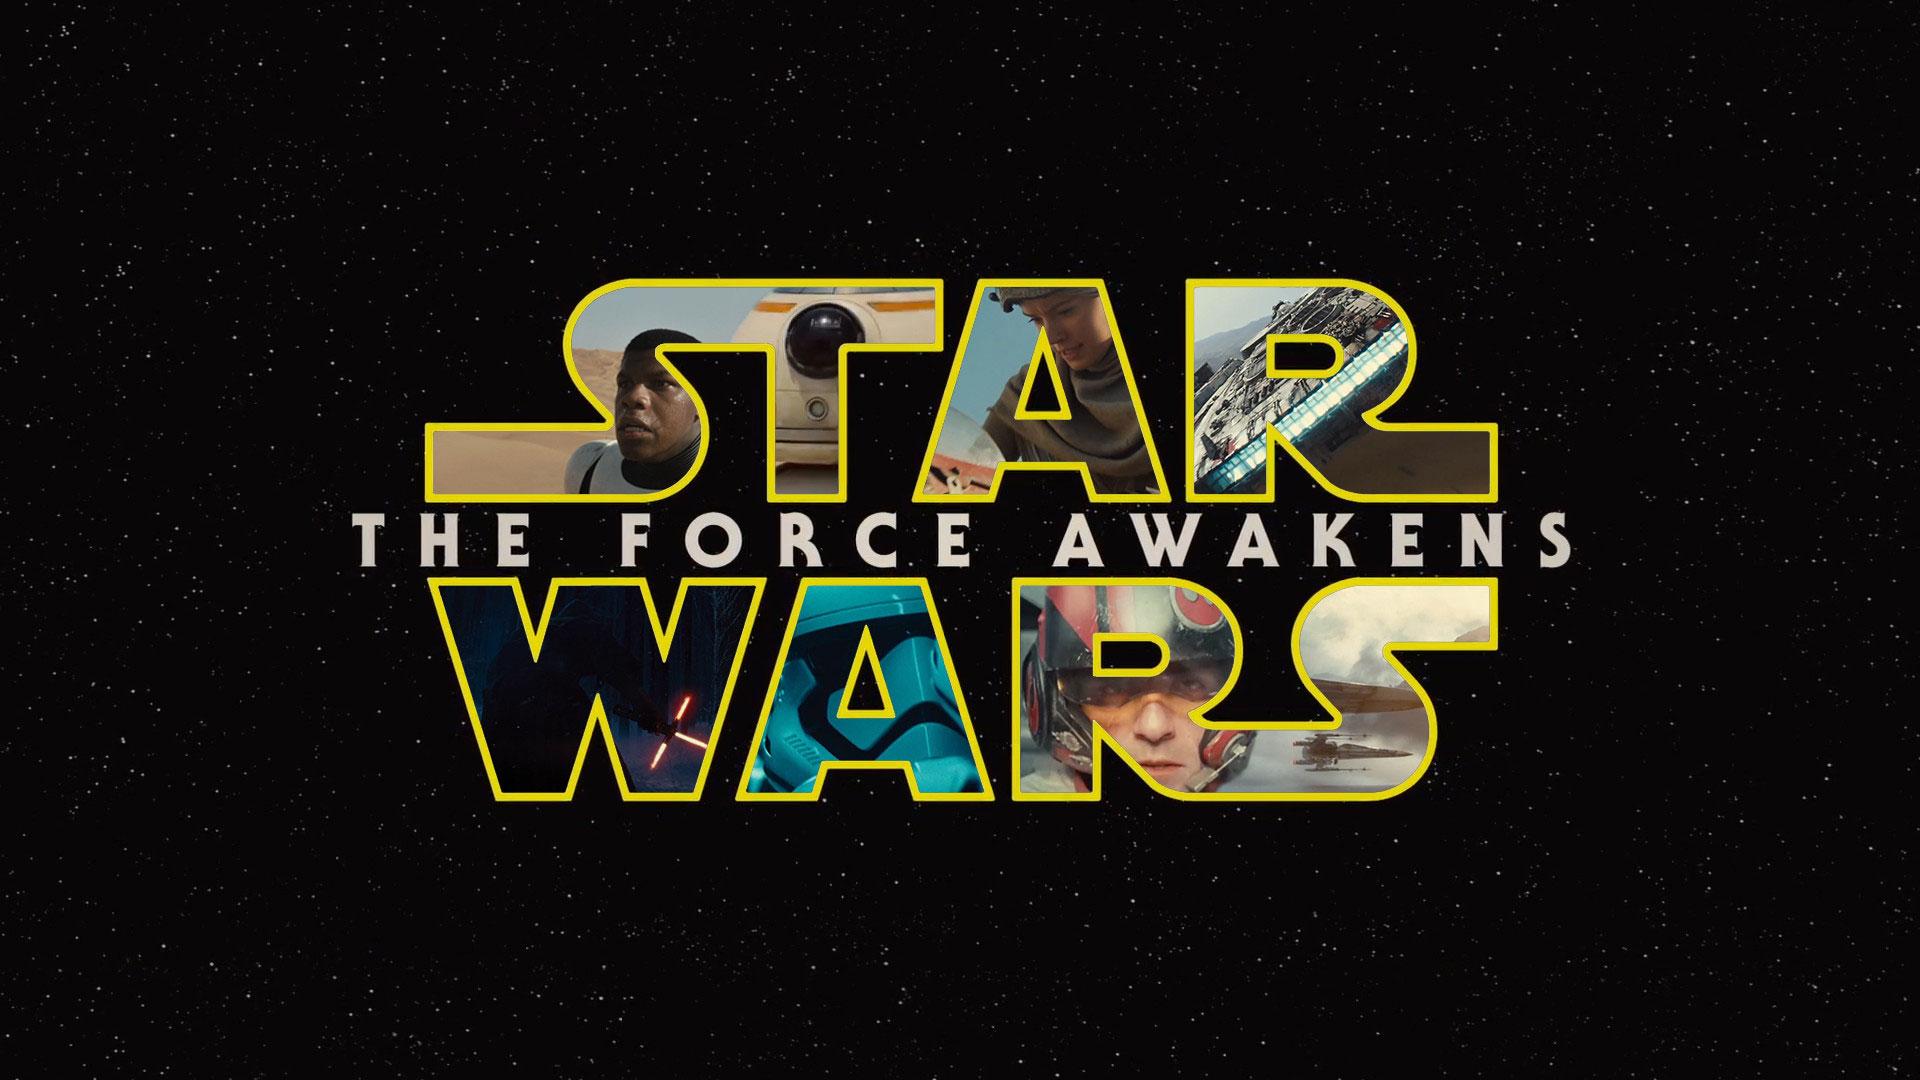 Star Wars: The Force Awakens Wallpaper and Lego